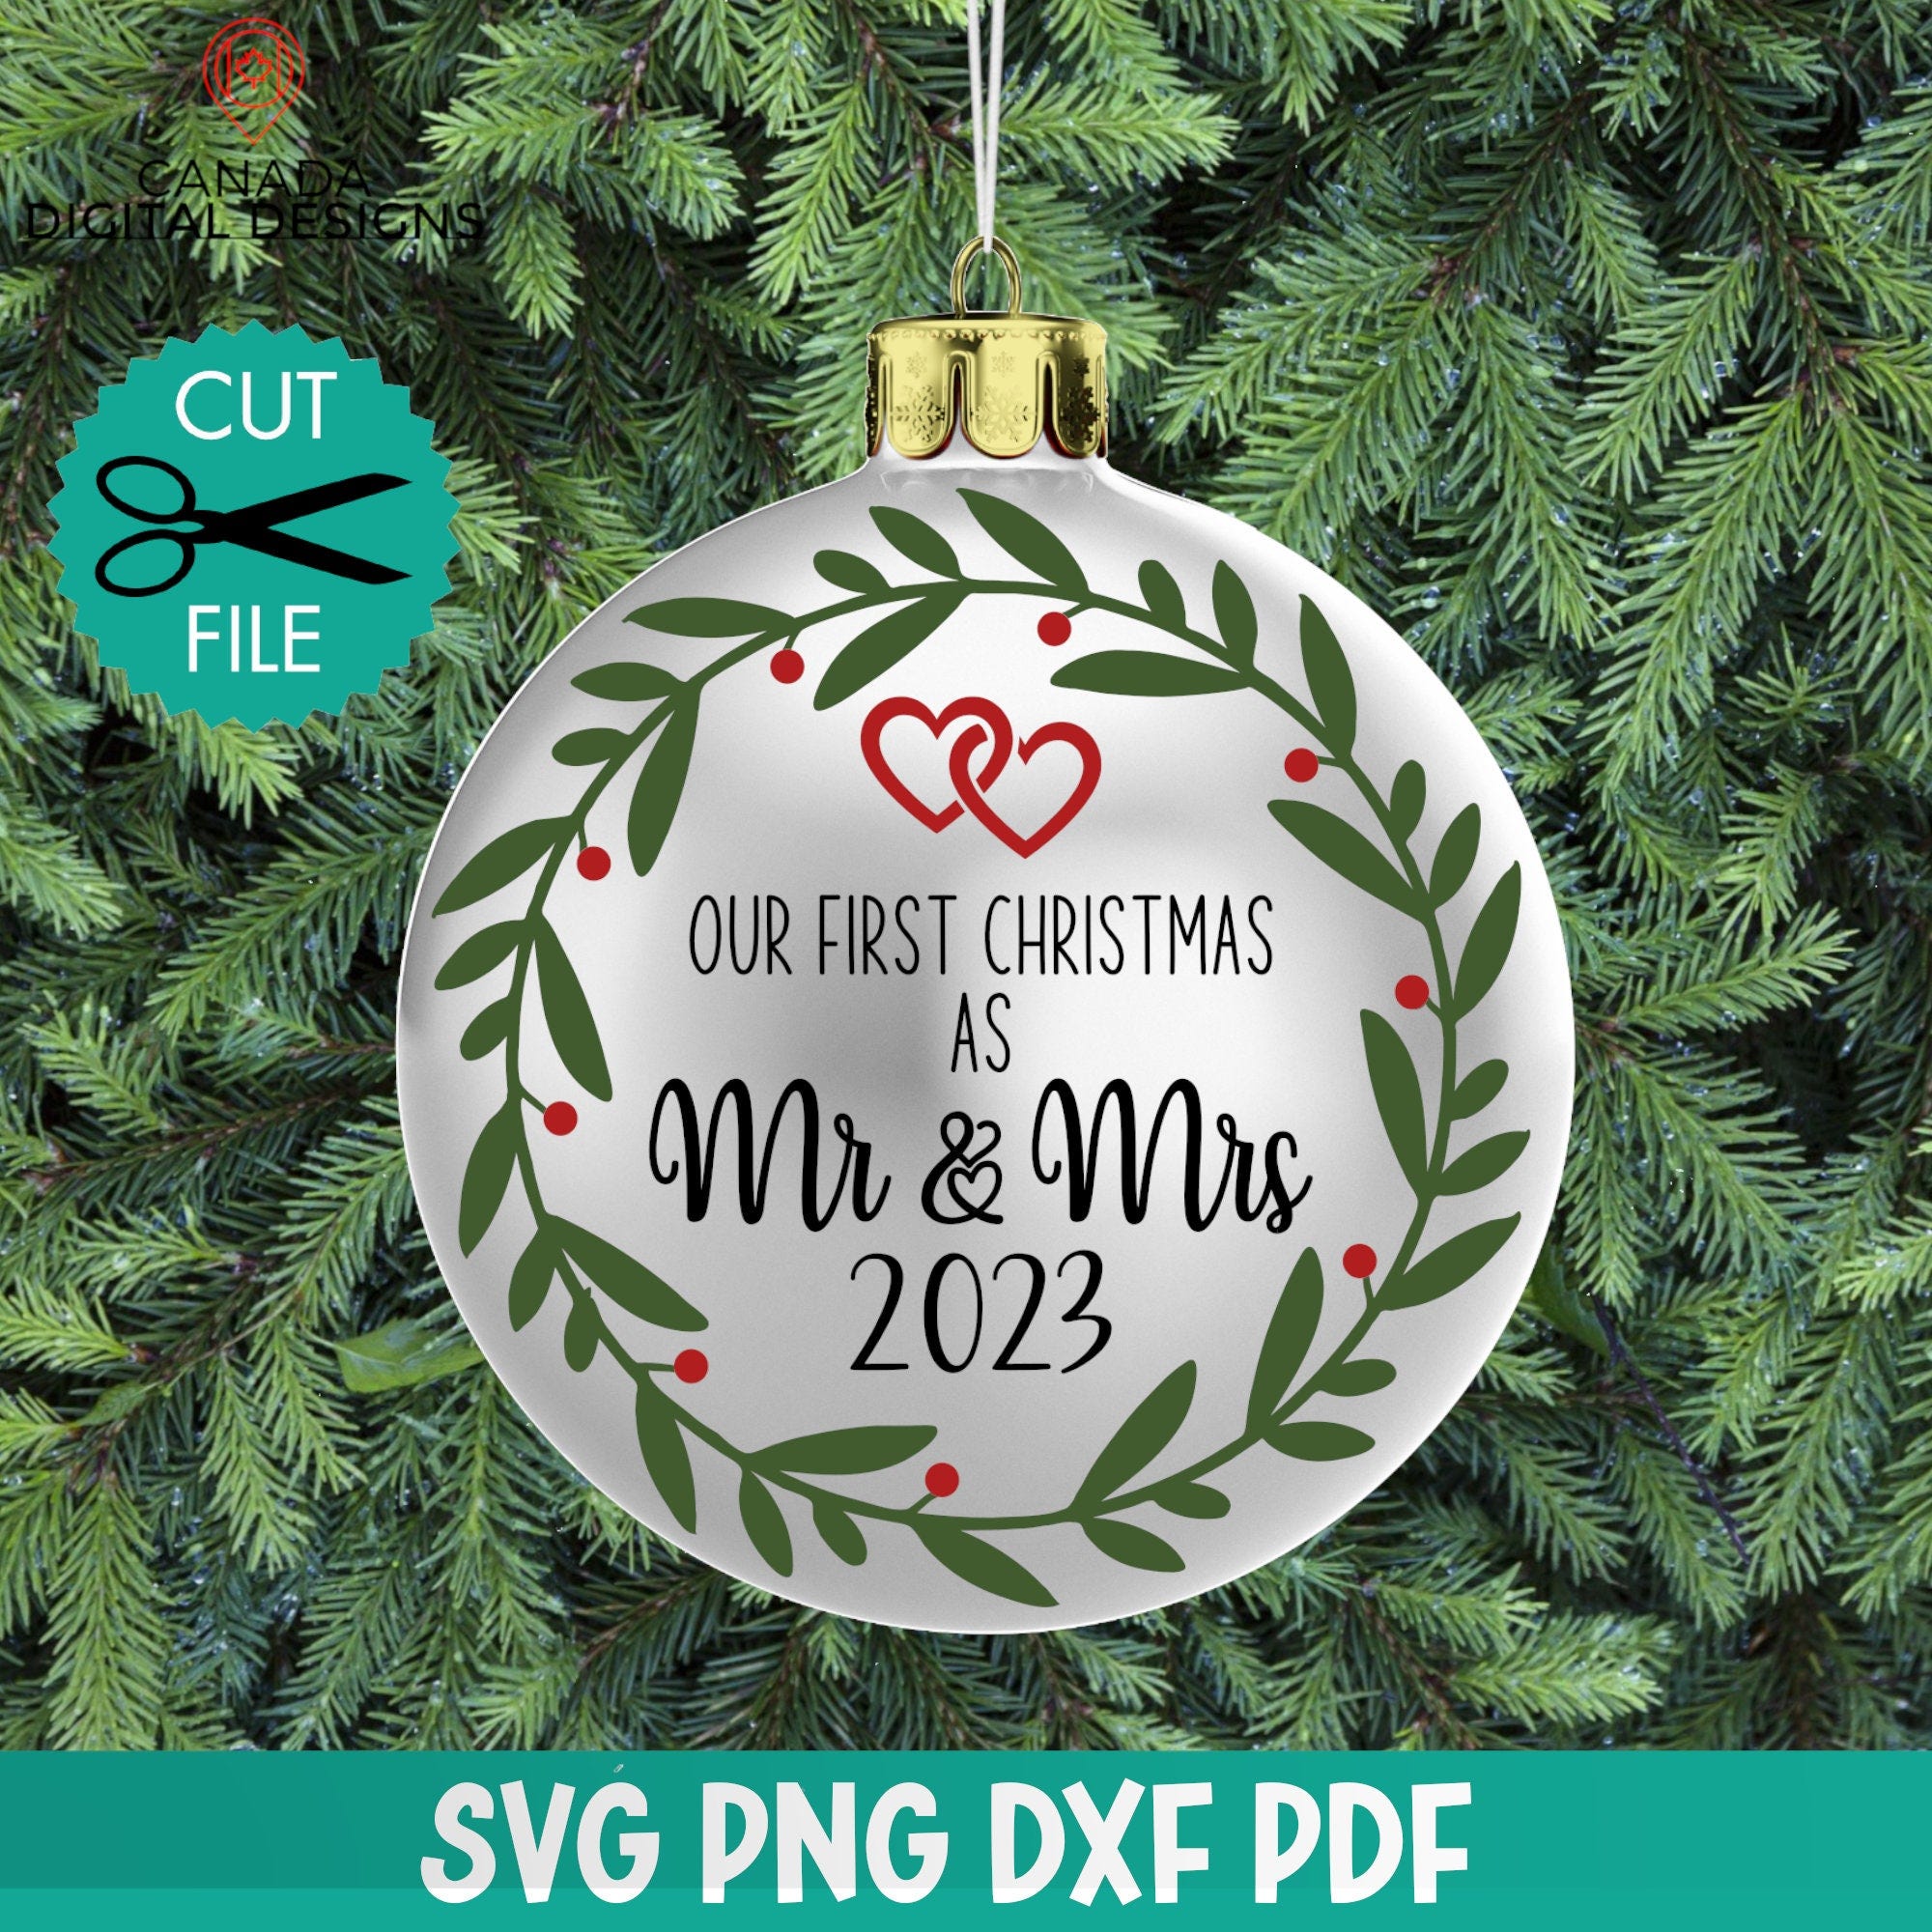 Our First Christmas as Mr & Mrs svg, Holiday ornament svg, First Christmas 2023 svg, Mr Mrs cut file, 2023 ornament svg, Cricut svg file